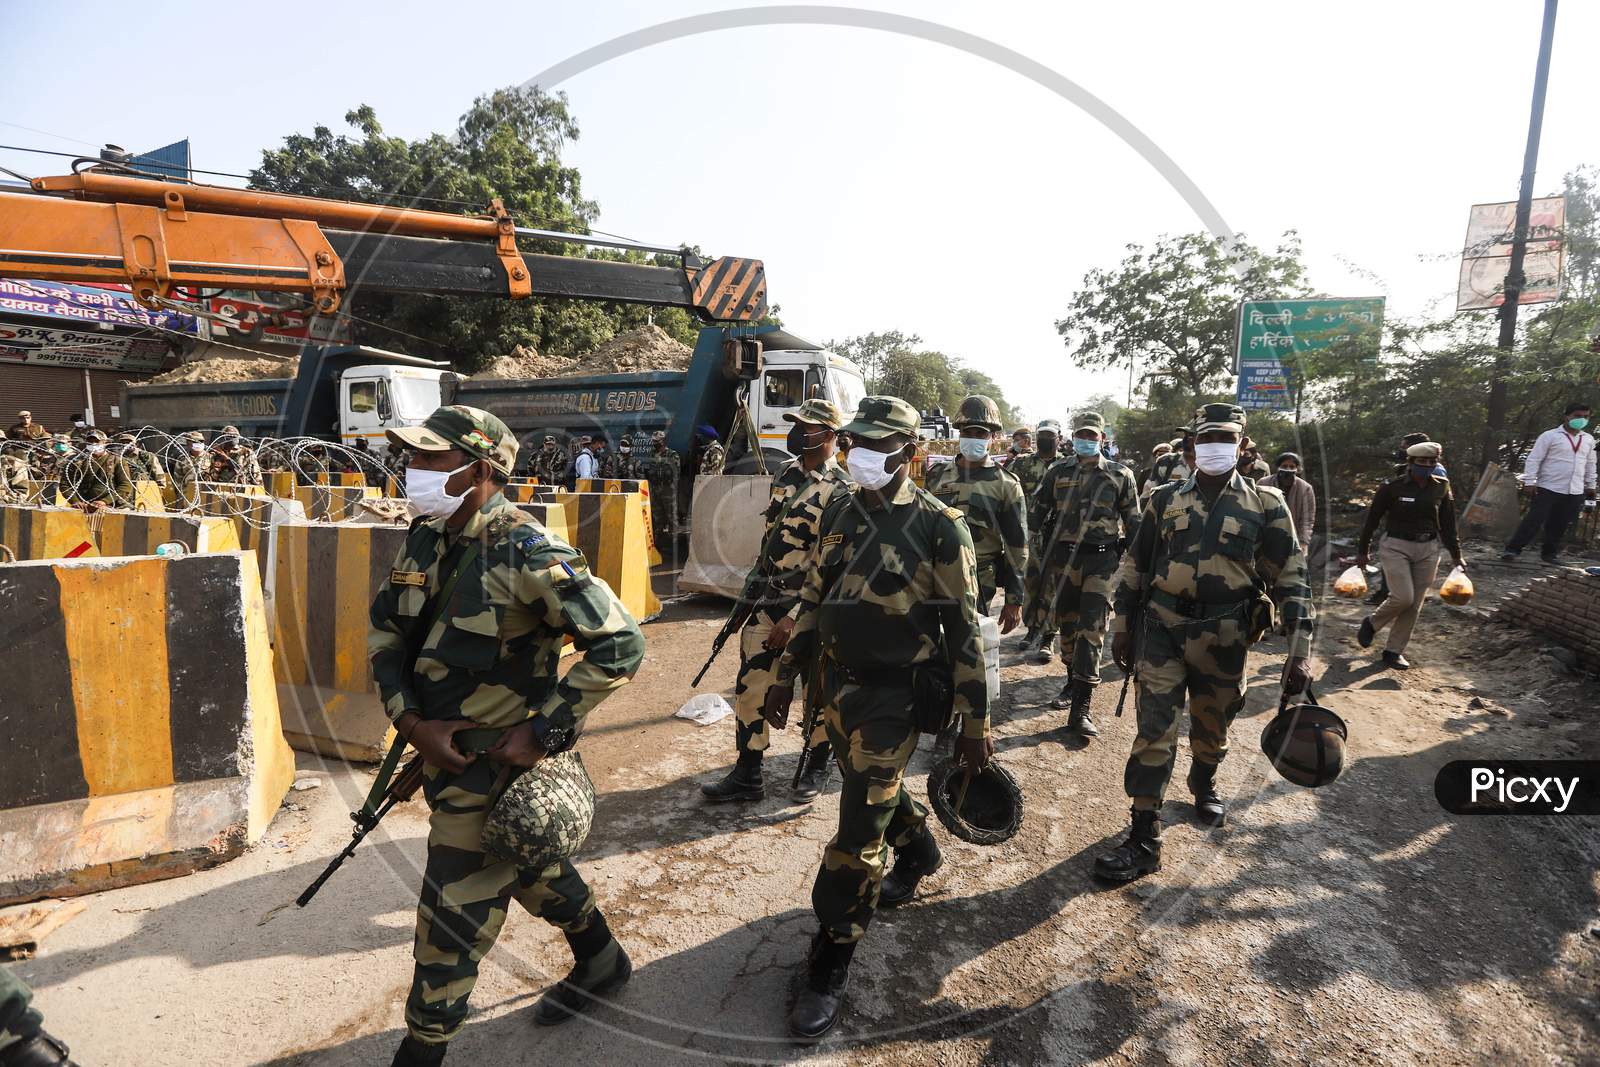 Heavy security at  Haryana-New Delhi border to stop agitating farmers. Farmers are protesting against  new farm laws that they fear will reduce their earnings and give more power to large retailers.